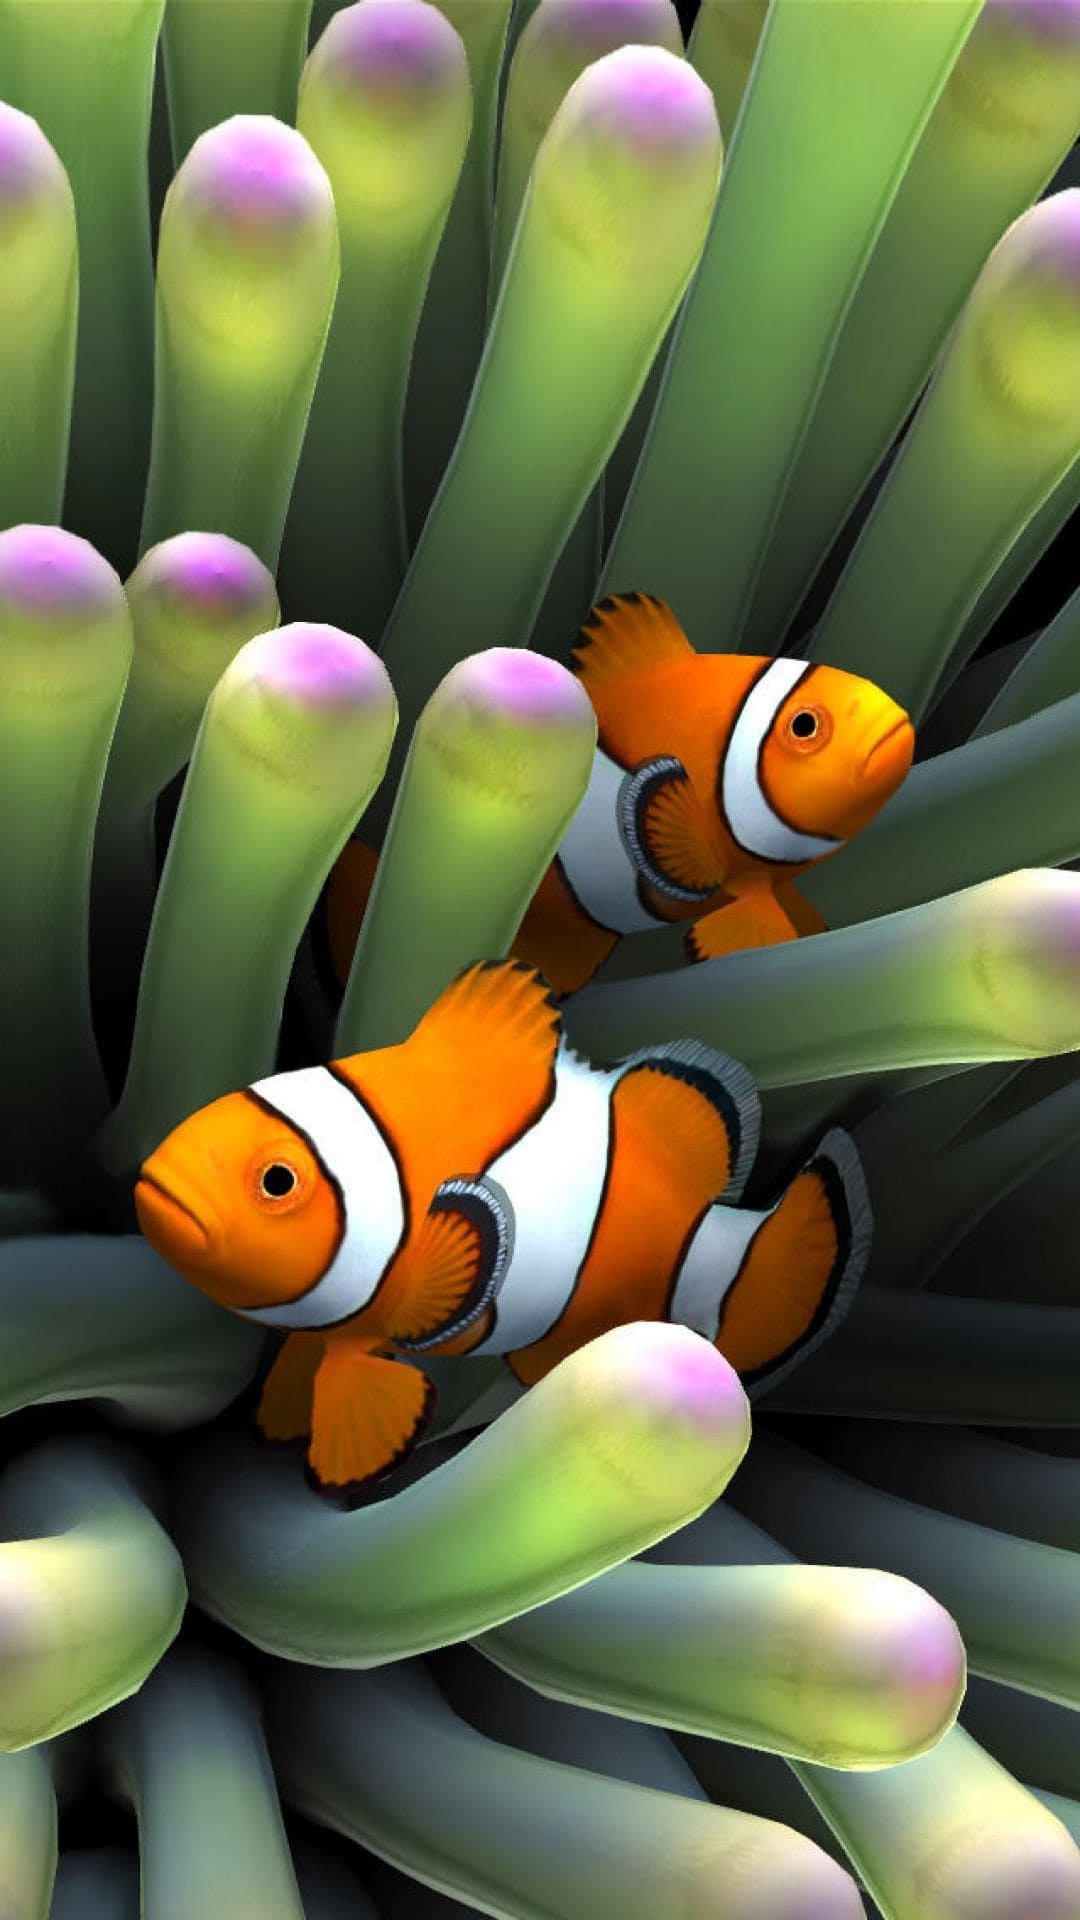 Clown Fish: Known for three vertical white stripes or bars down their sides. 1080x1920 Full HD Background.